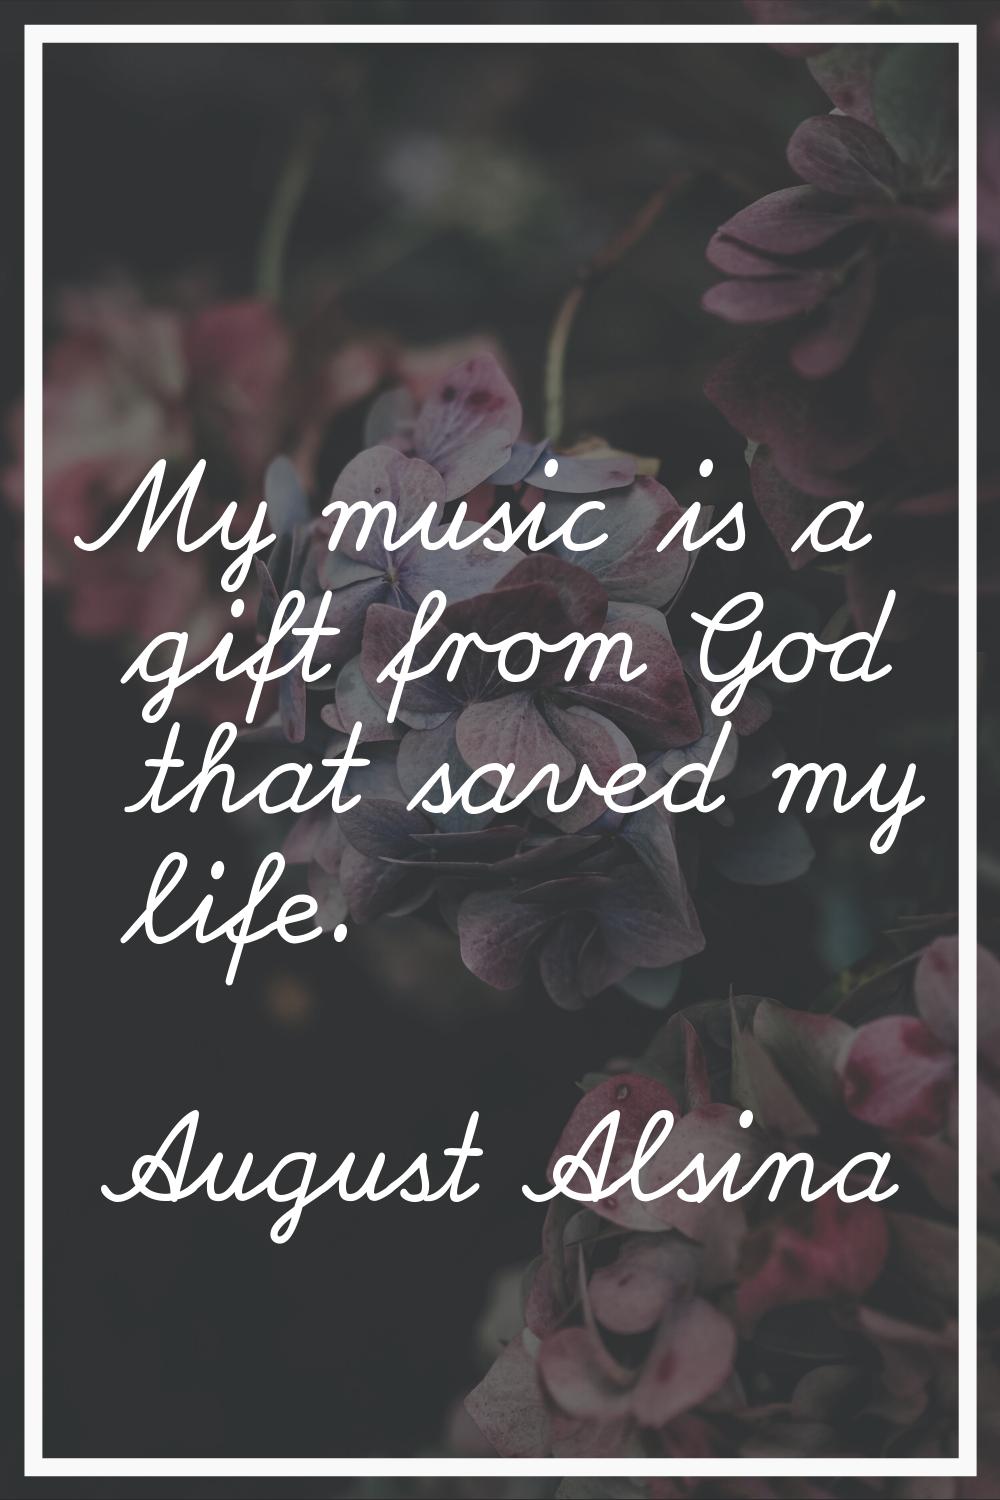 My music is a gift from God that saved my life.